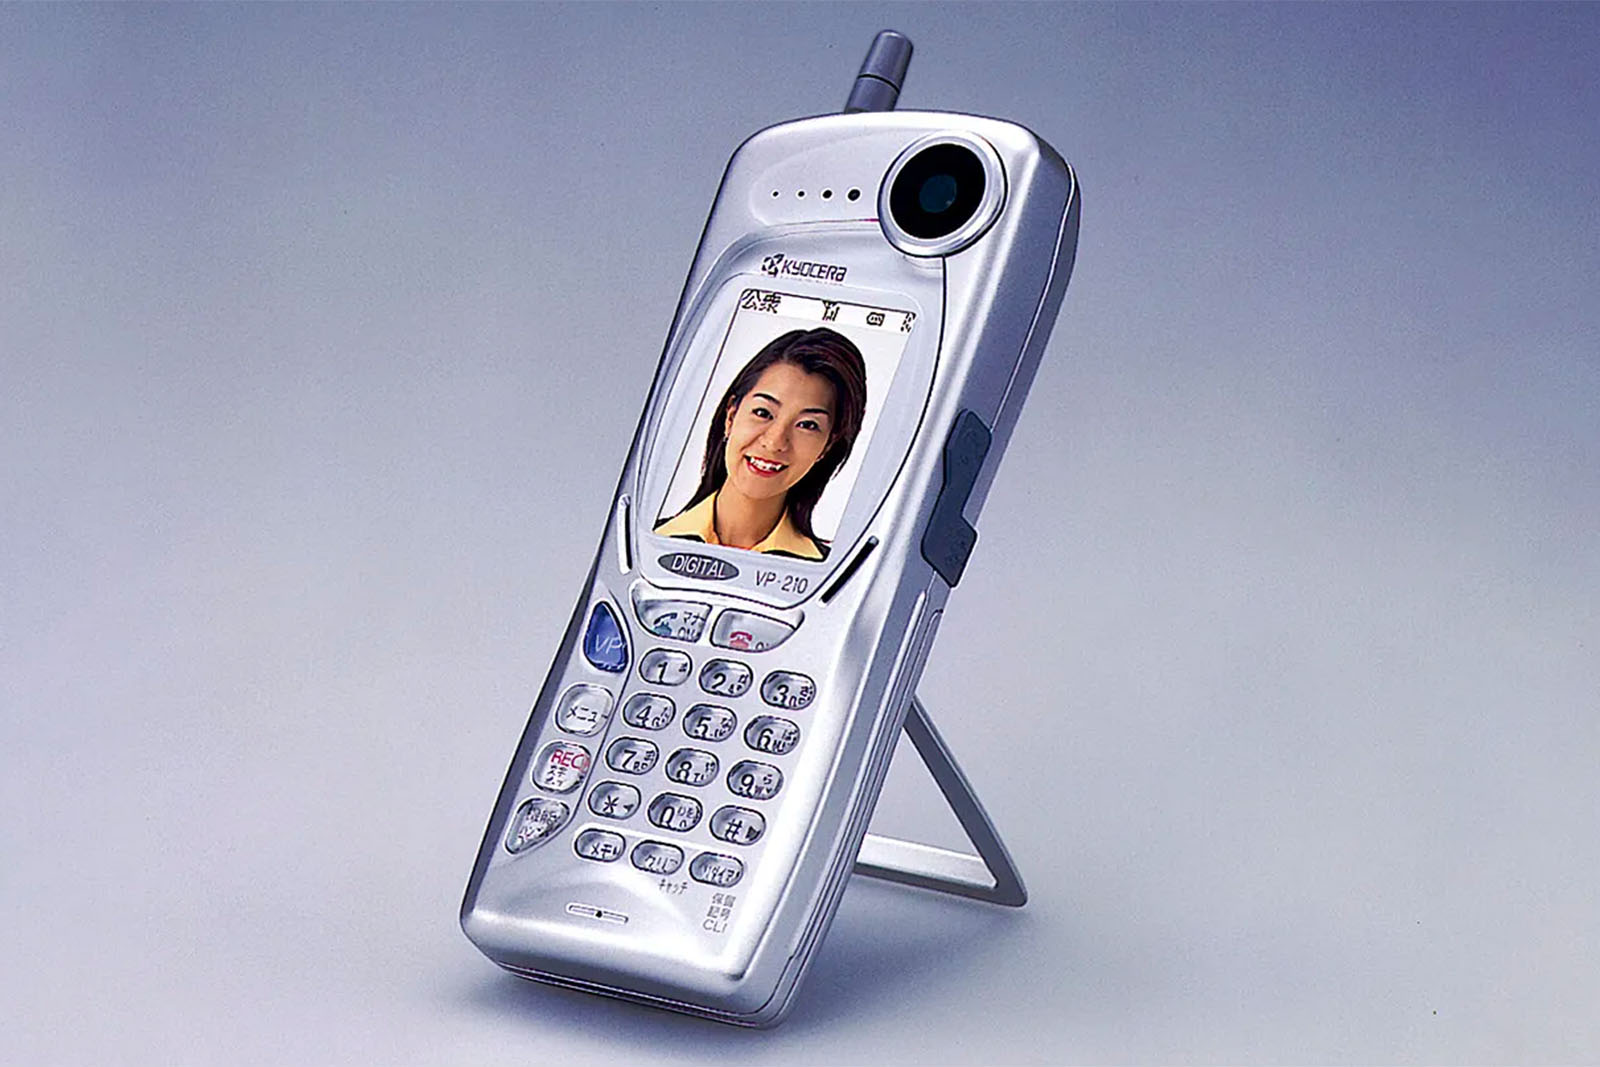 Kyocera’s VP-210 was probably the first ever camera phone. Image © Kyocera